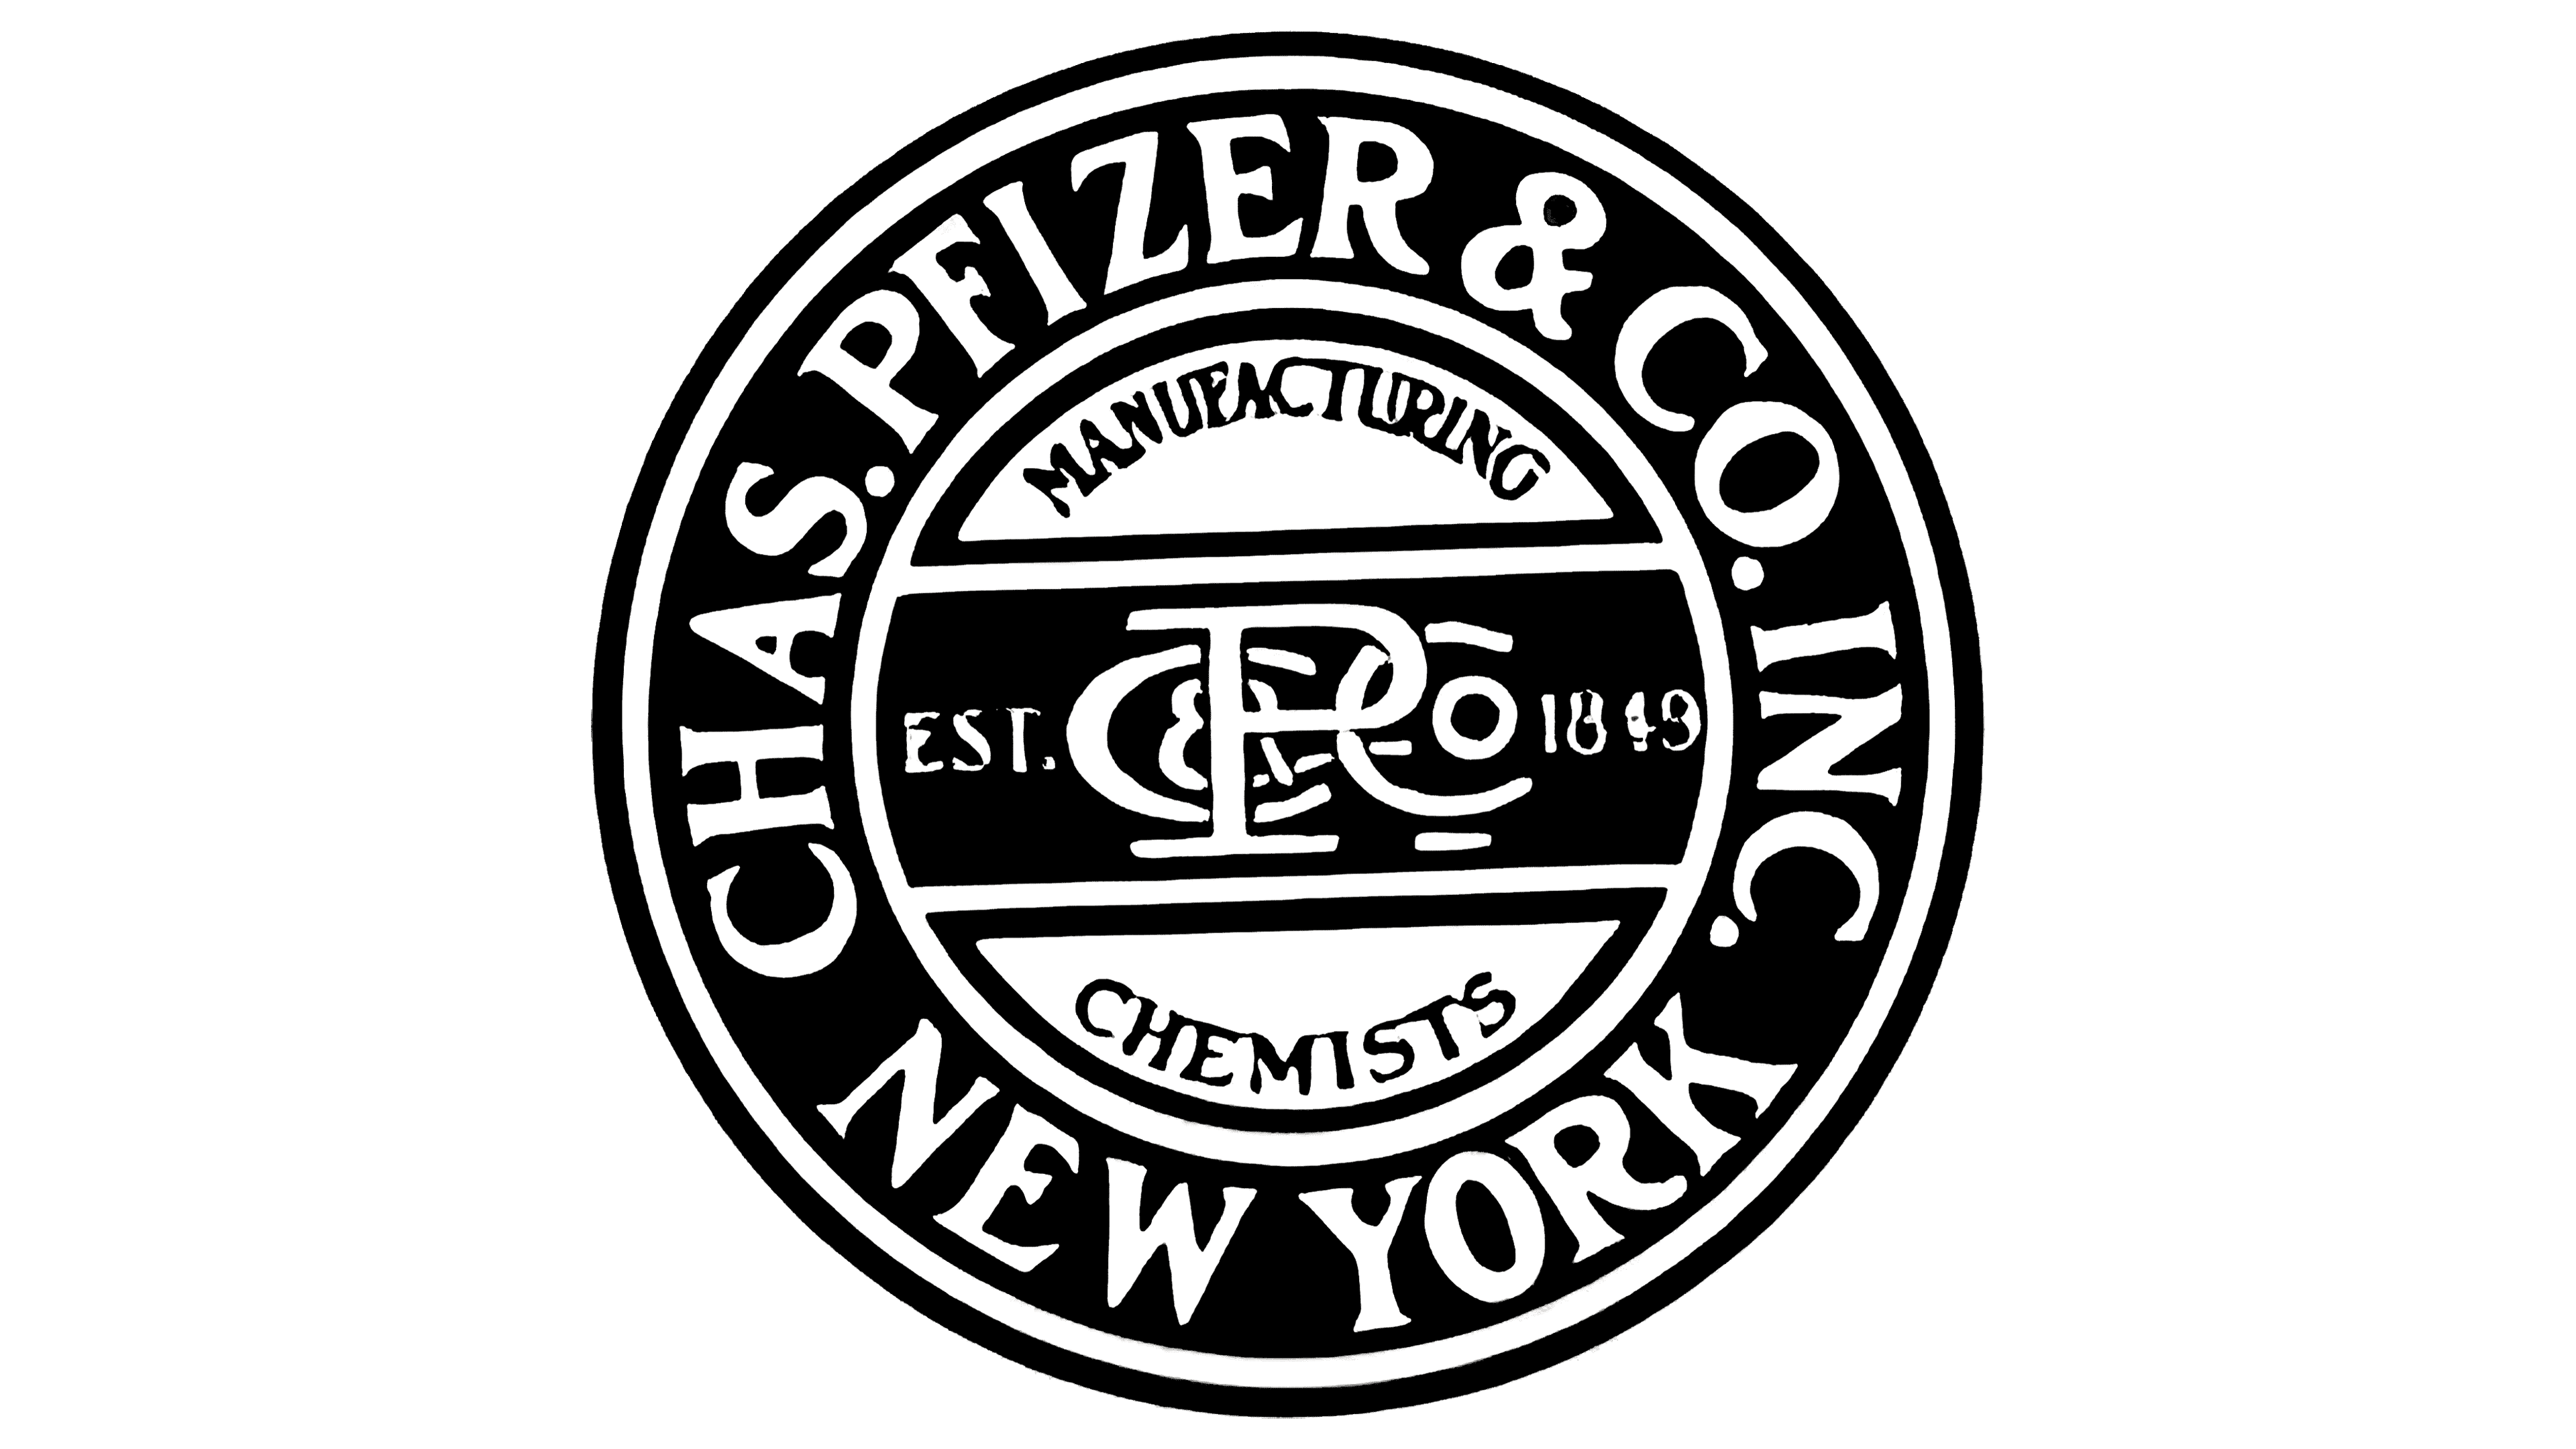 Systematic redesign of Pfizer.com